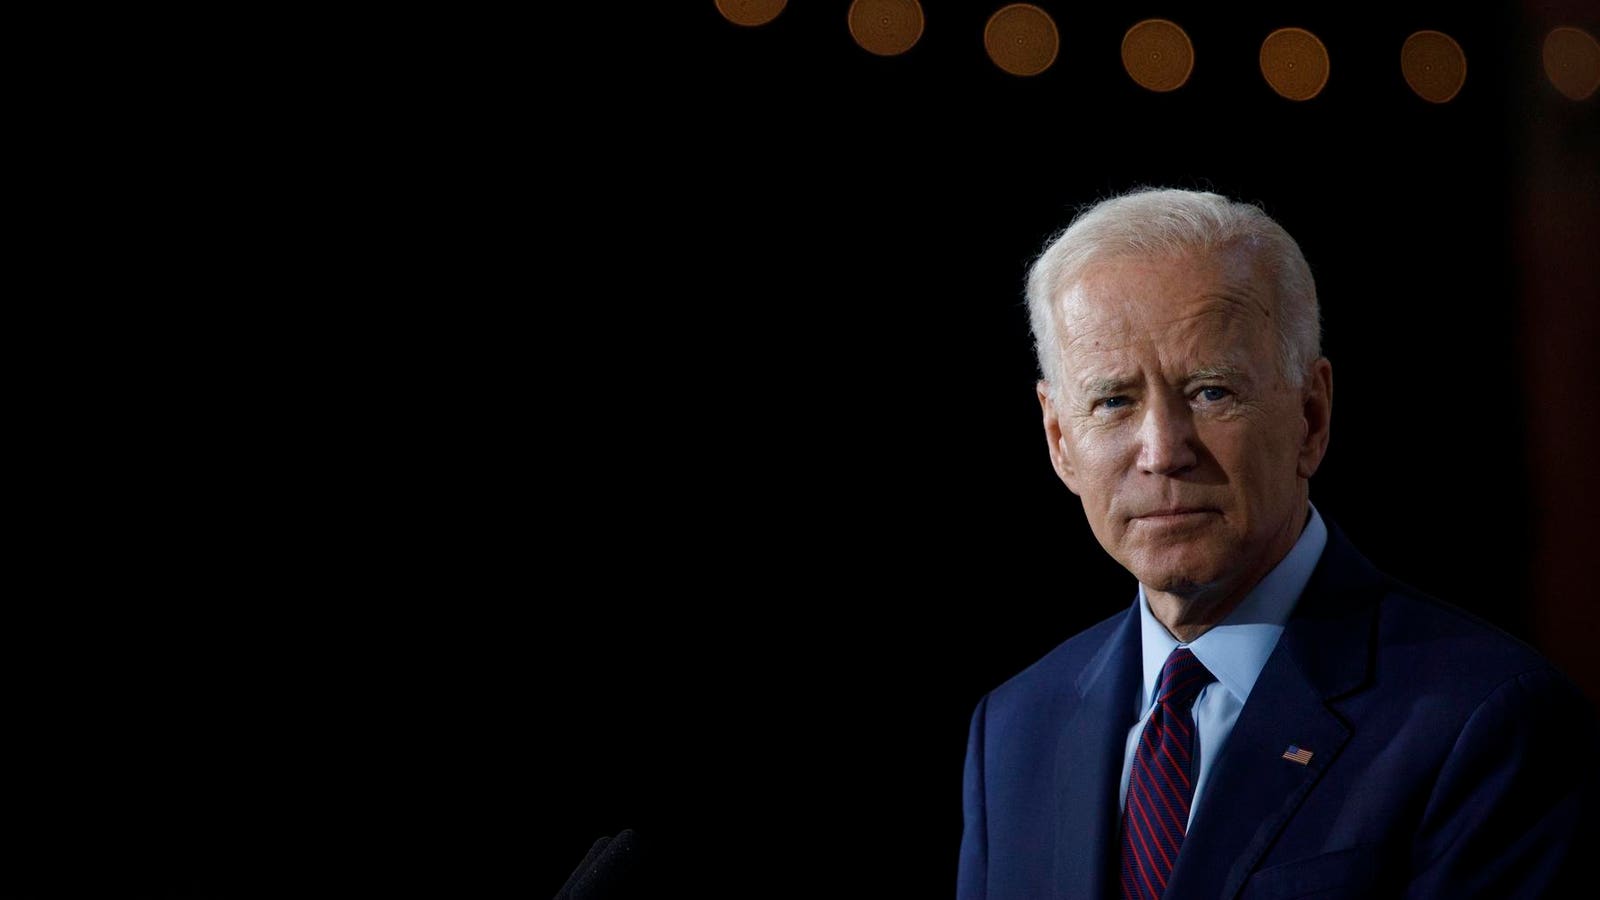 biden backtracks on likelihood of a cease-fire by monday after idf attack